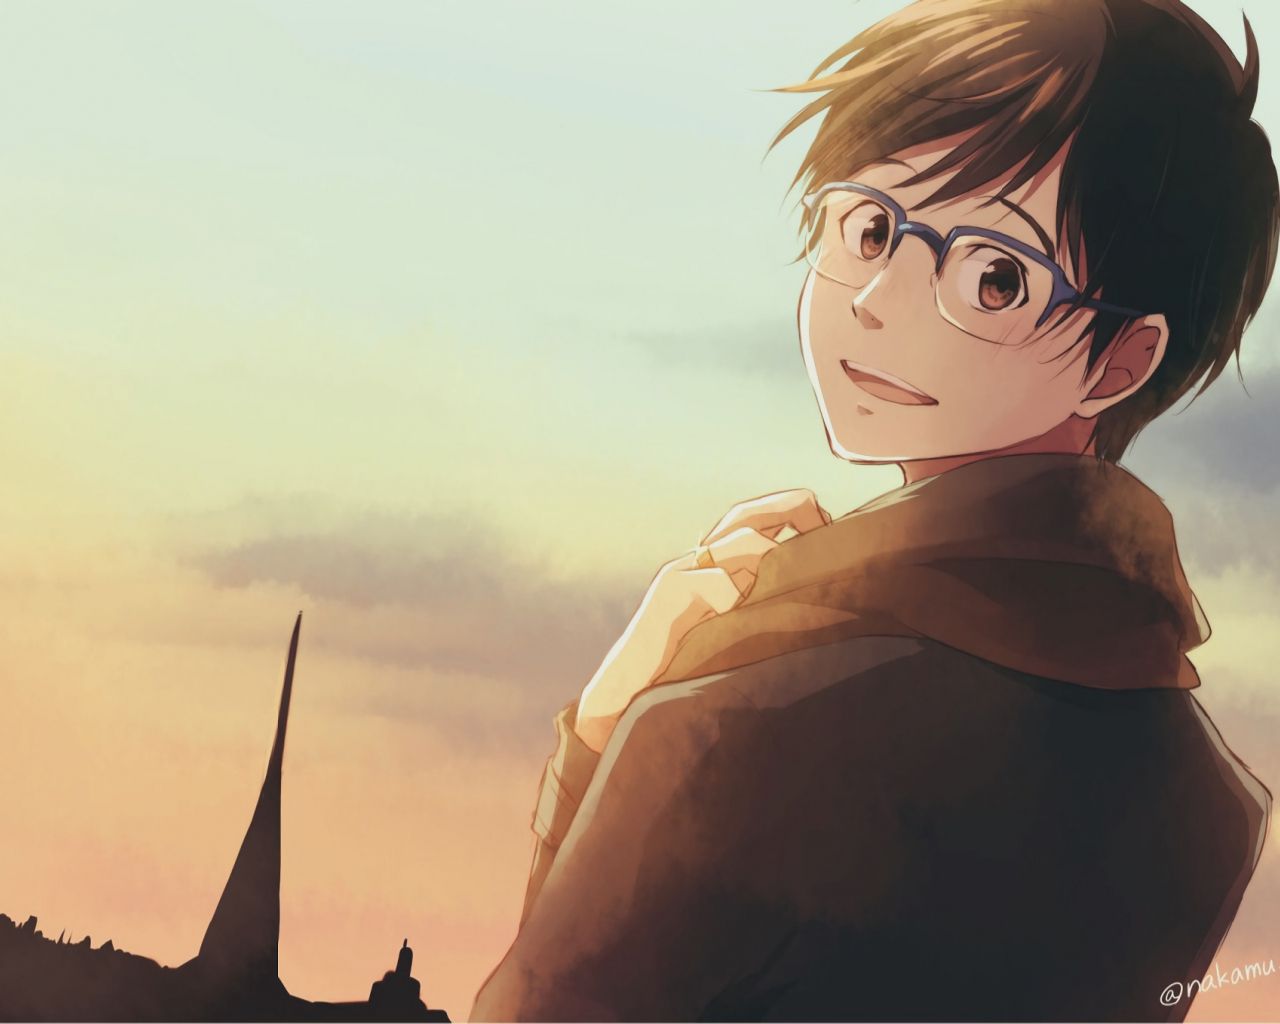 A young man with glasses and black hair - 1280x1024